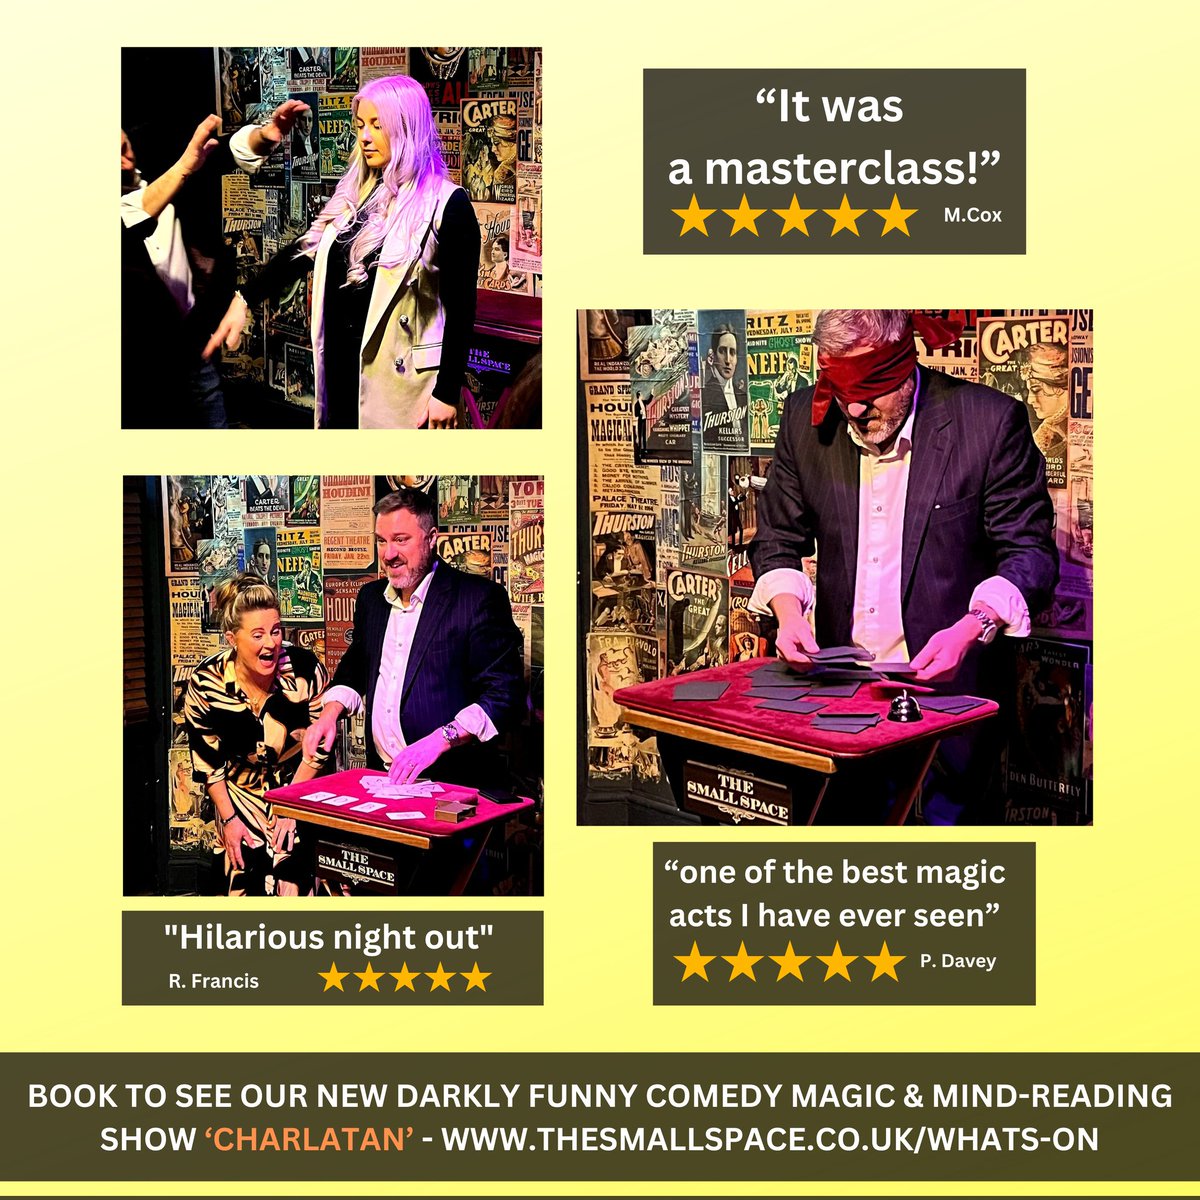 Do something different this Fri 5th April, visit Wales' Officially No.1 Rated Nightlife Venue & see our new 5 Star-Rated darkly funny paranormal show 'CHARLATAN' thesmallspace.co.uk/whats-on #theatre #magic #comedy #liveentertainment #Barry #cardiff #whatsoncardiff #supportlocal